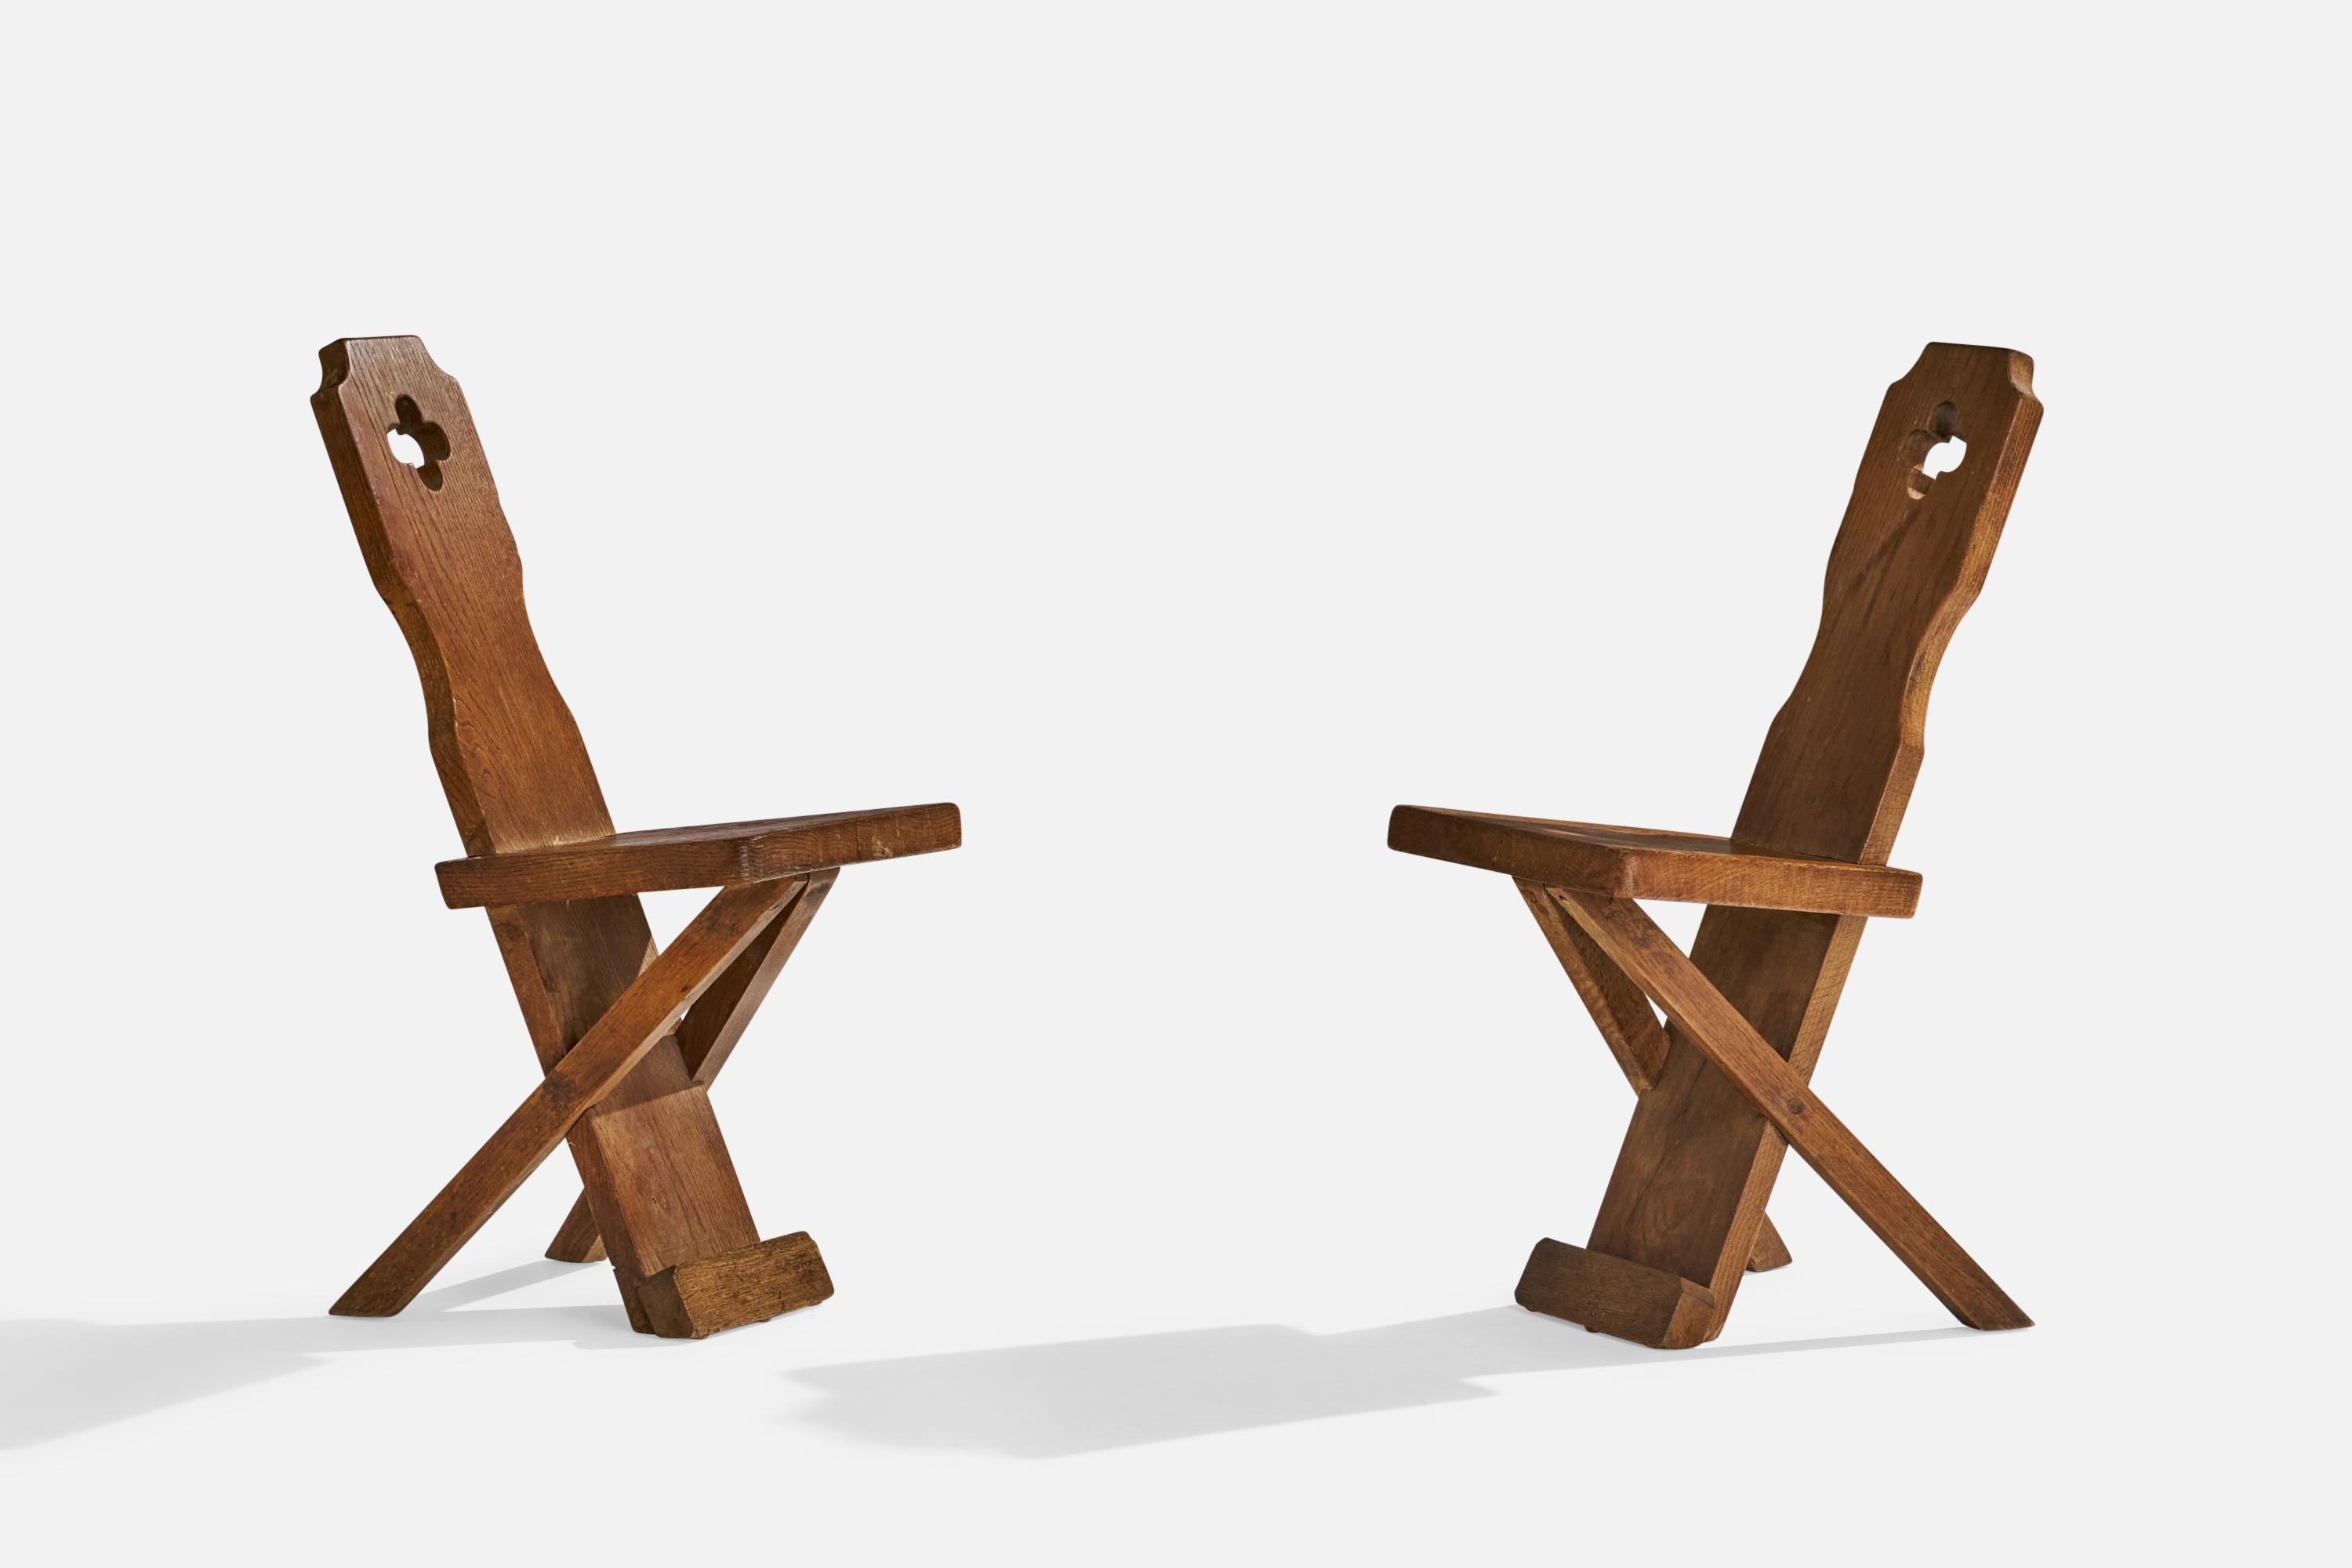 A pair of oak side chairs or dining chairs designed and produced in Denmark, c. 1920s.

Seat height 18”.